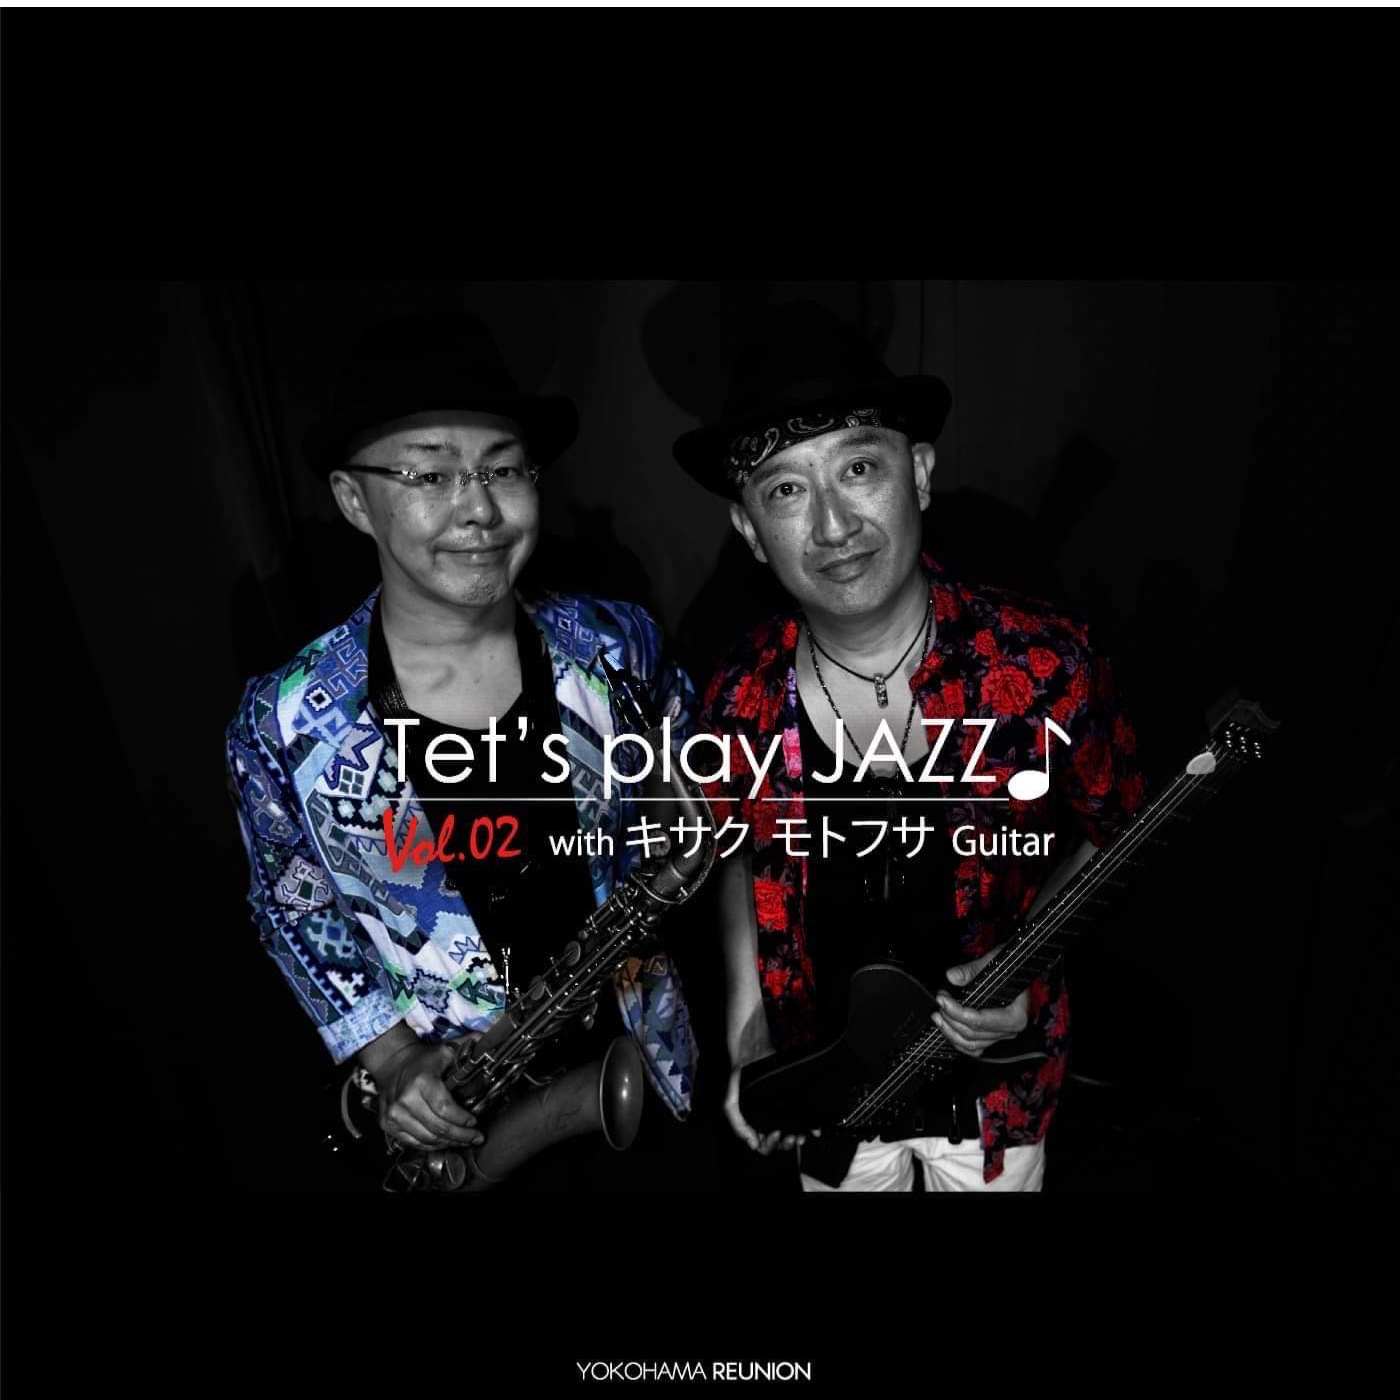 "Tet's play JAZZ ♪ with キサク モトフサ"   渡辺てつ